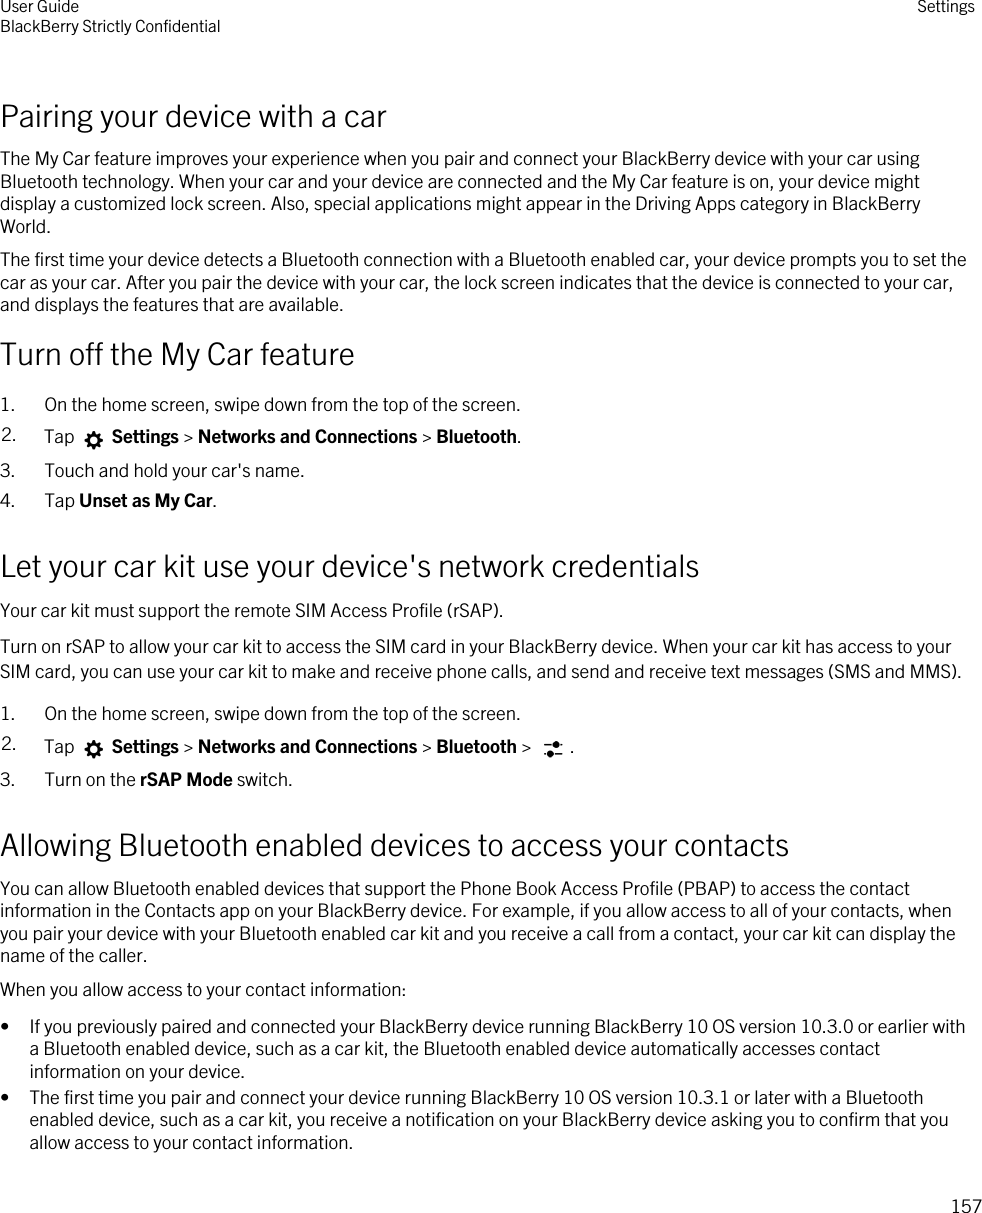 Pairing your device with a carThe My Car feature improves your experience when you pair and connect your BlackBerry device with your car using Bluetooth technology. When your car and your device are connected and the My Car feature is on, your device might display a customized lock screen. Also, special applications might appear in the Driving Apps category in BlackBerry World.The first time your device detects a Bluetooth connection with a Bluetooth enabled car, your device prompts you to set the car as your car. After you pair the device with your car, the lock screen indicates that the device is connected to your car, and displays the features that are available.Turn off the My Car feature1. On the home screen, swipe down from the top of the screen.2. Tap   Settings &gt; Networks and Connections &gt; Bluetooth.3. Touch and hold your car&apos;s name.4. Tap Unset as My Car.Let your car kit use your device&apos;s network credentialsYour car kit must support the remote SIM Access Profile (rSAP).Turn on rSAP to allow your car kit to access the SIM card in your BlackBerry device. When your car kit has access to your SIM card, you can use your car kit to make and receive phone calls, and send and receive text messages (SMS and MMS).1. On the home screen, swipe down from the top of the screen.2. Tap   Settings &gt; Networks and Connections &gt; Bluetooth &gt;  .3. Turn on the rSAP Mode switch.Allowing Bluetooth enabled devices to access your contactsYou can allow Bluetooth enabled devices that support the Phone Book Access Profile (PBAP) to access the contact information in the Contacts app on your BlackBerry device. For example, if you allow access to all of your contacts, when you pair your device with your Bluetooth enabled car kit and you receive a call from a contact, your car kit can display the name of the caller.When you allow access to your contact information:• If you previously paired and connected your BlackBerry device running BlackBerry 10 OS version 10.3.0 or earlier with a Bluetooth enabled device, such as a car kit, the Bluetooth enabled device automatically accesses contact information on your device.• The first time you pair and connect your device running BlackBerry 10 OS version 10.3.1 or later with a Bluetooth enabled device, such as a car kit, you receive a notification on your BlackBerry device asking you to confirm that you allow access to your contact information.User GuideBlackBerry Strictly Confidential Settings157